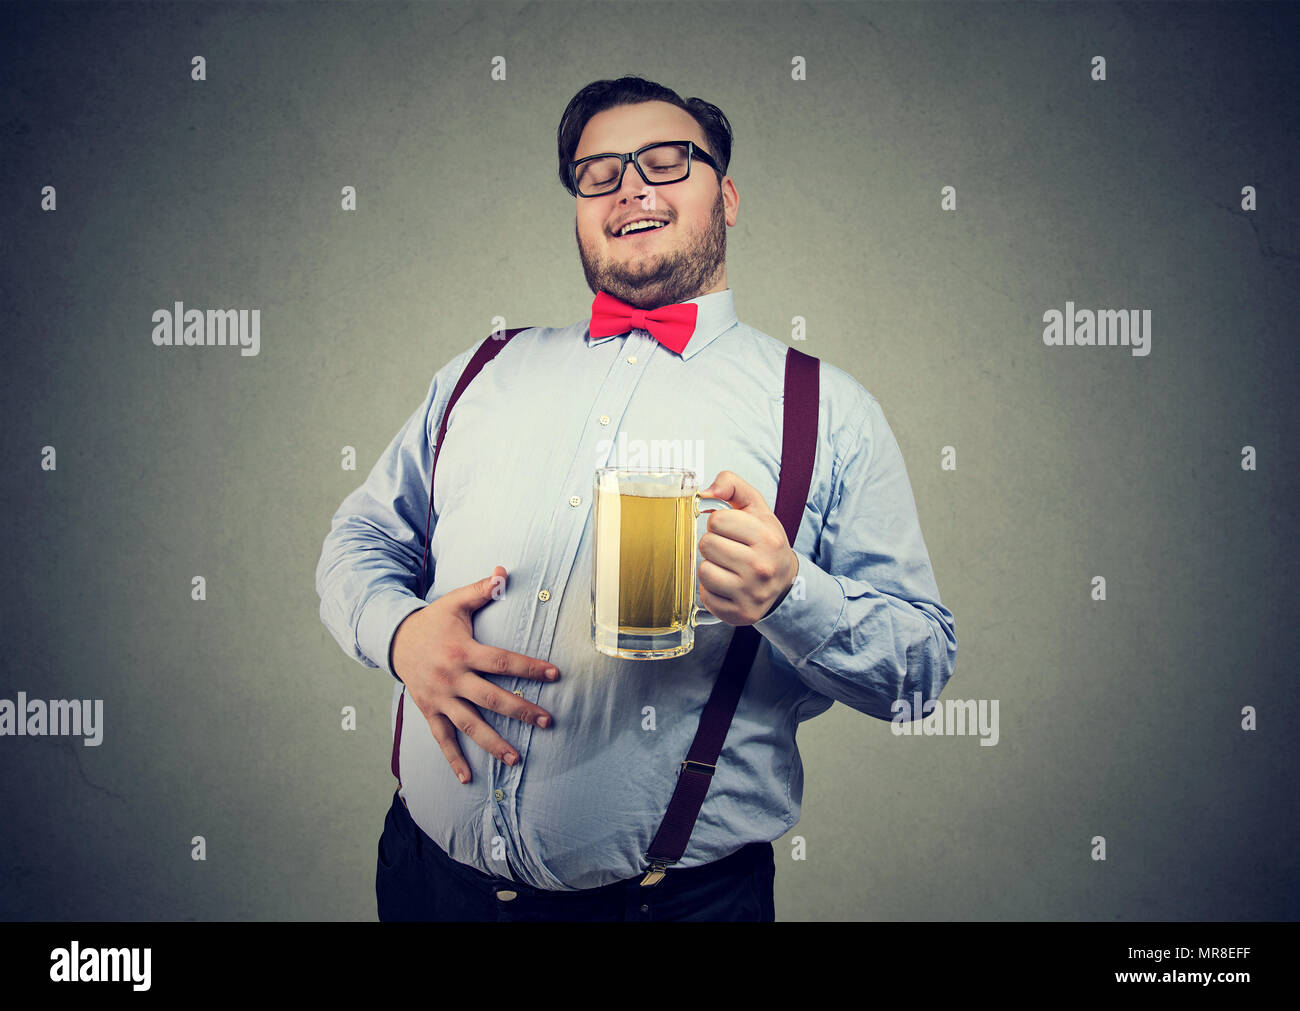 Young overweight happy man with potbelly drinking beer enjoying his beverage Stock Photo